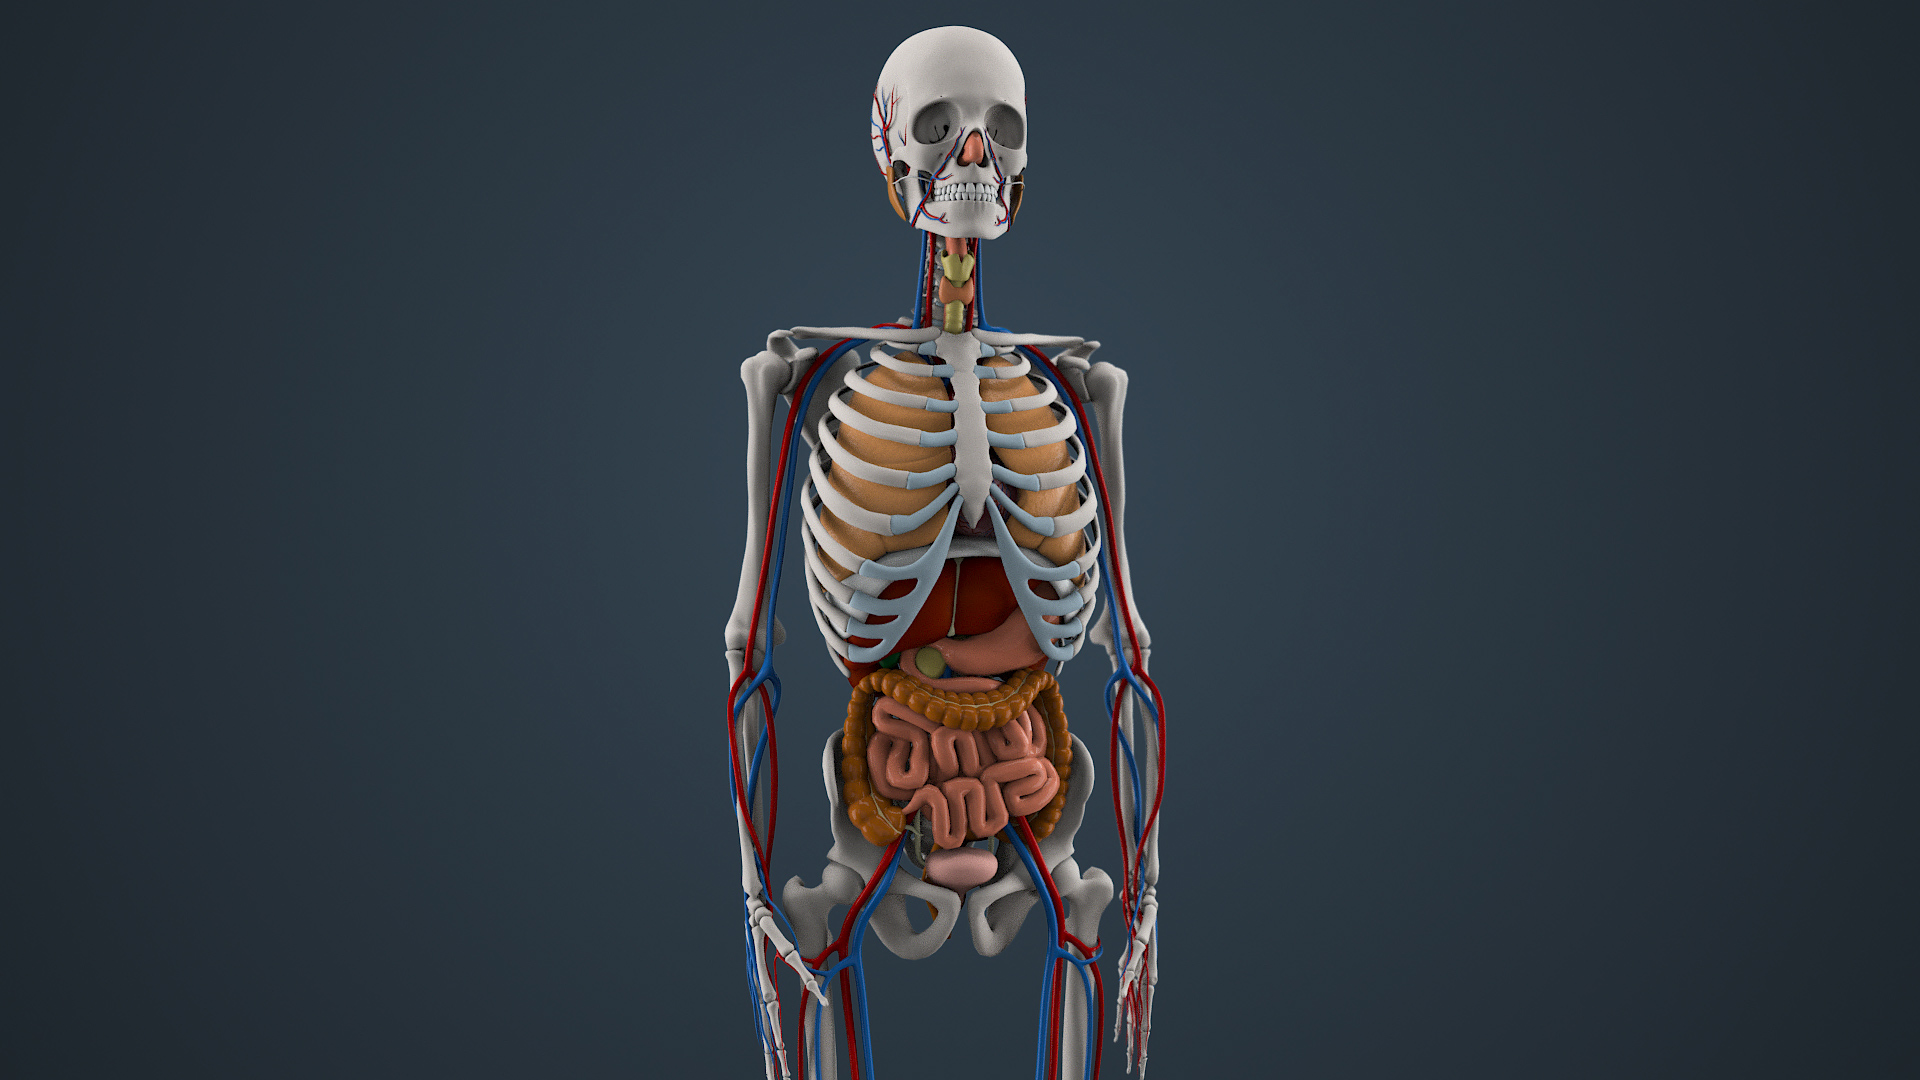 Functions of the Human Skeleton